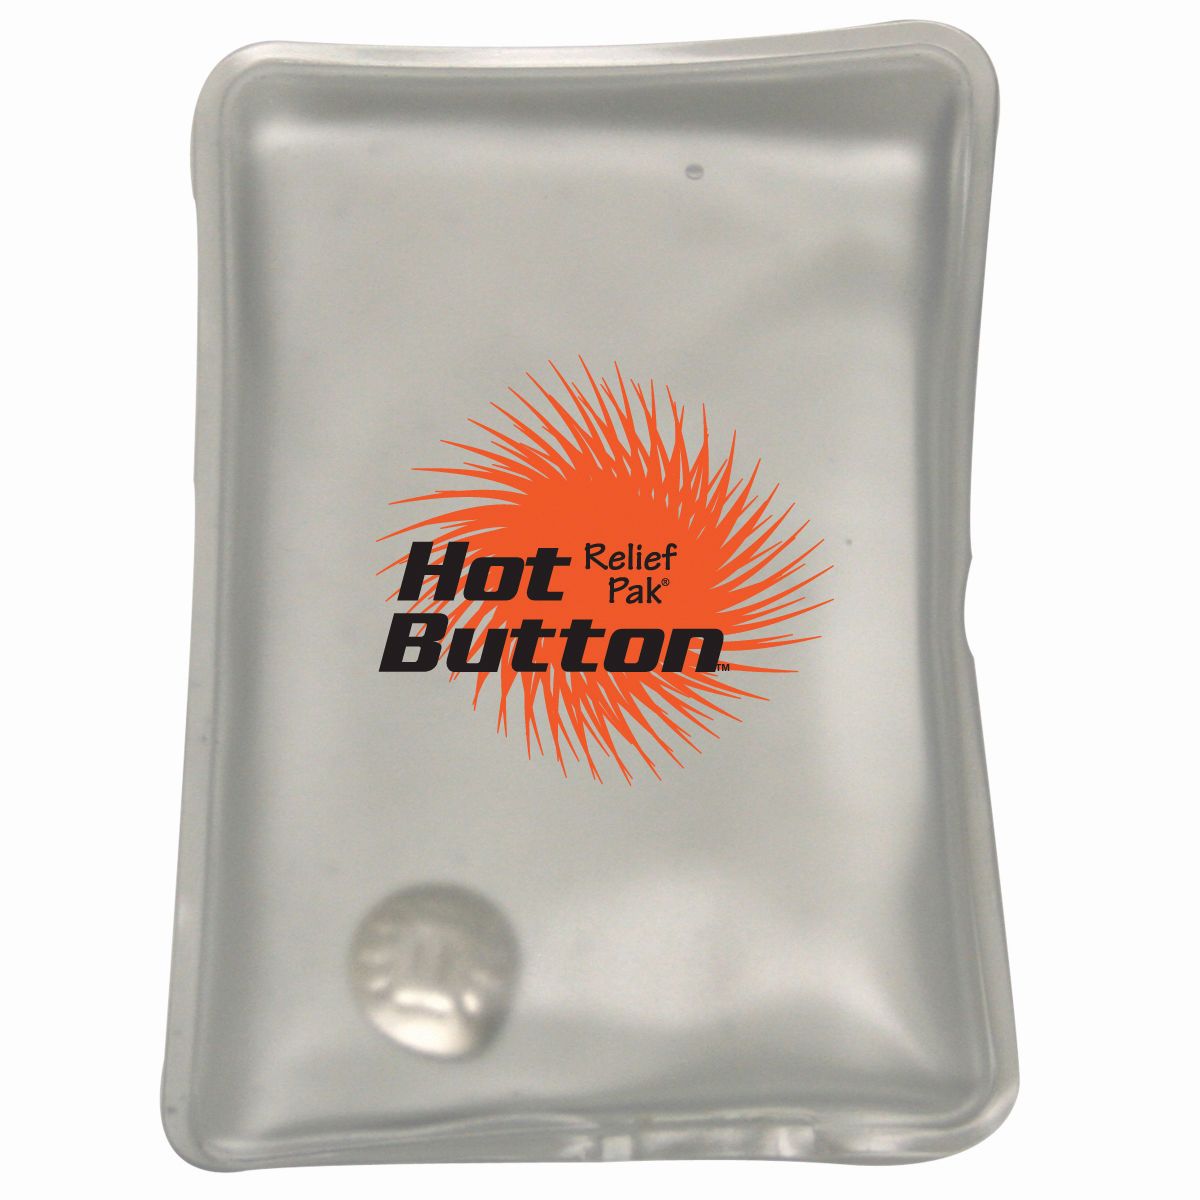 Relief Pak Hot Button instant reusable hot compress, small (3.5" x 5.5")